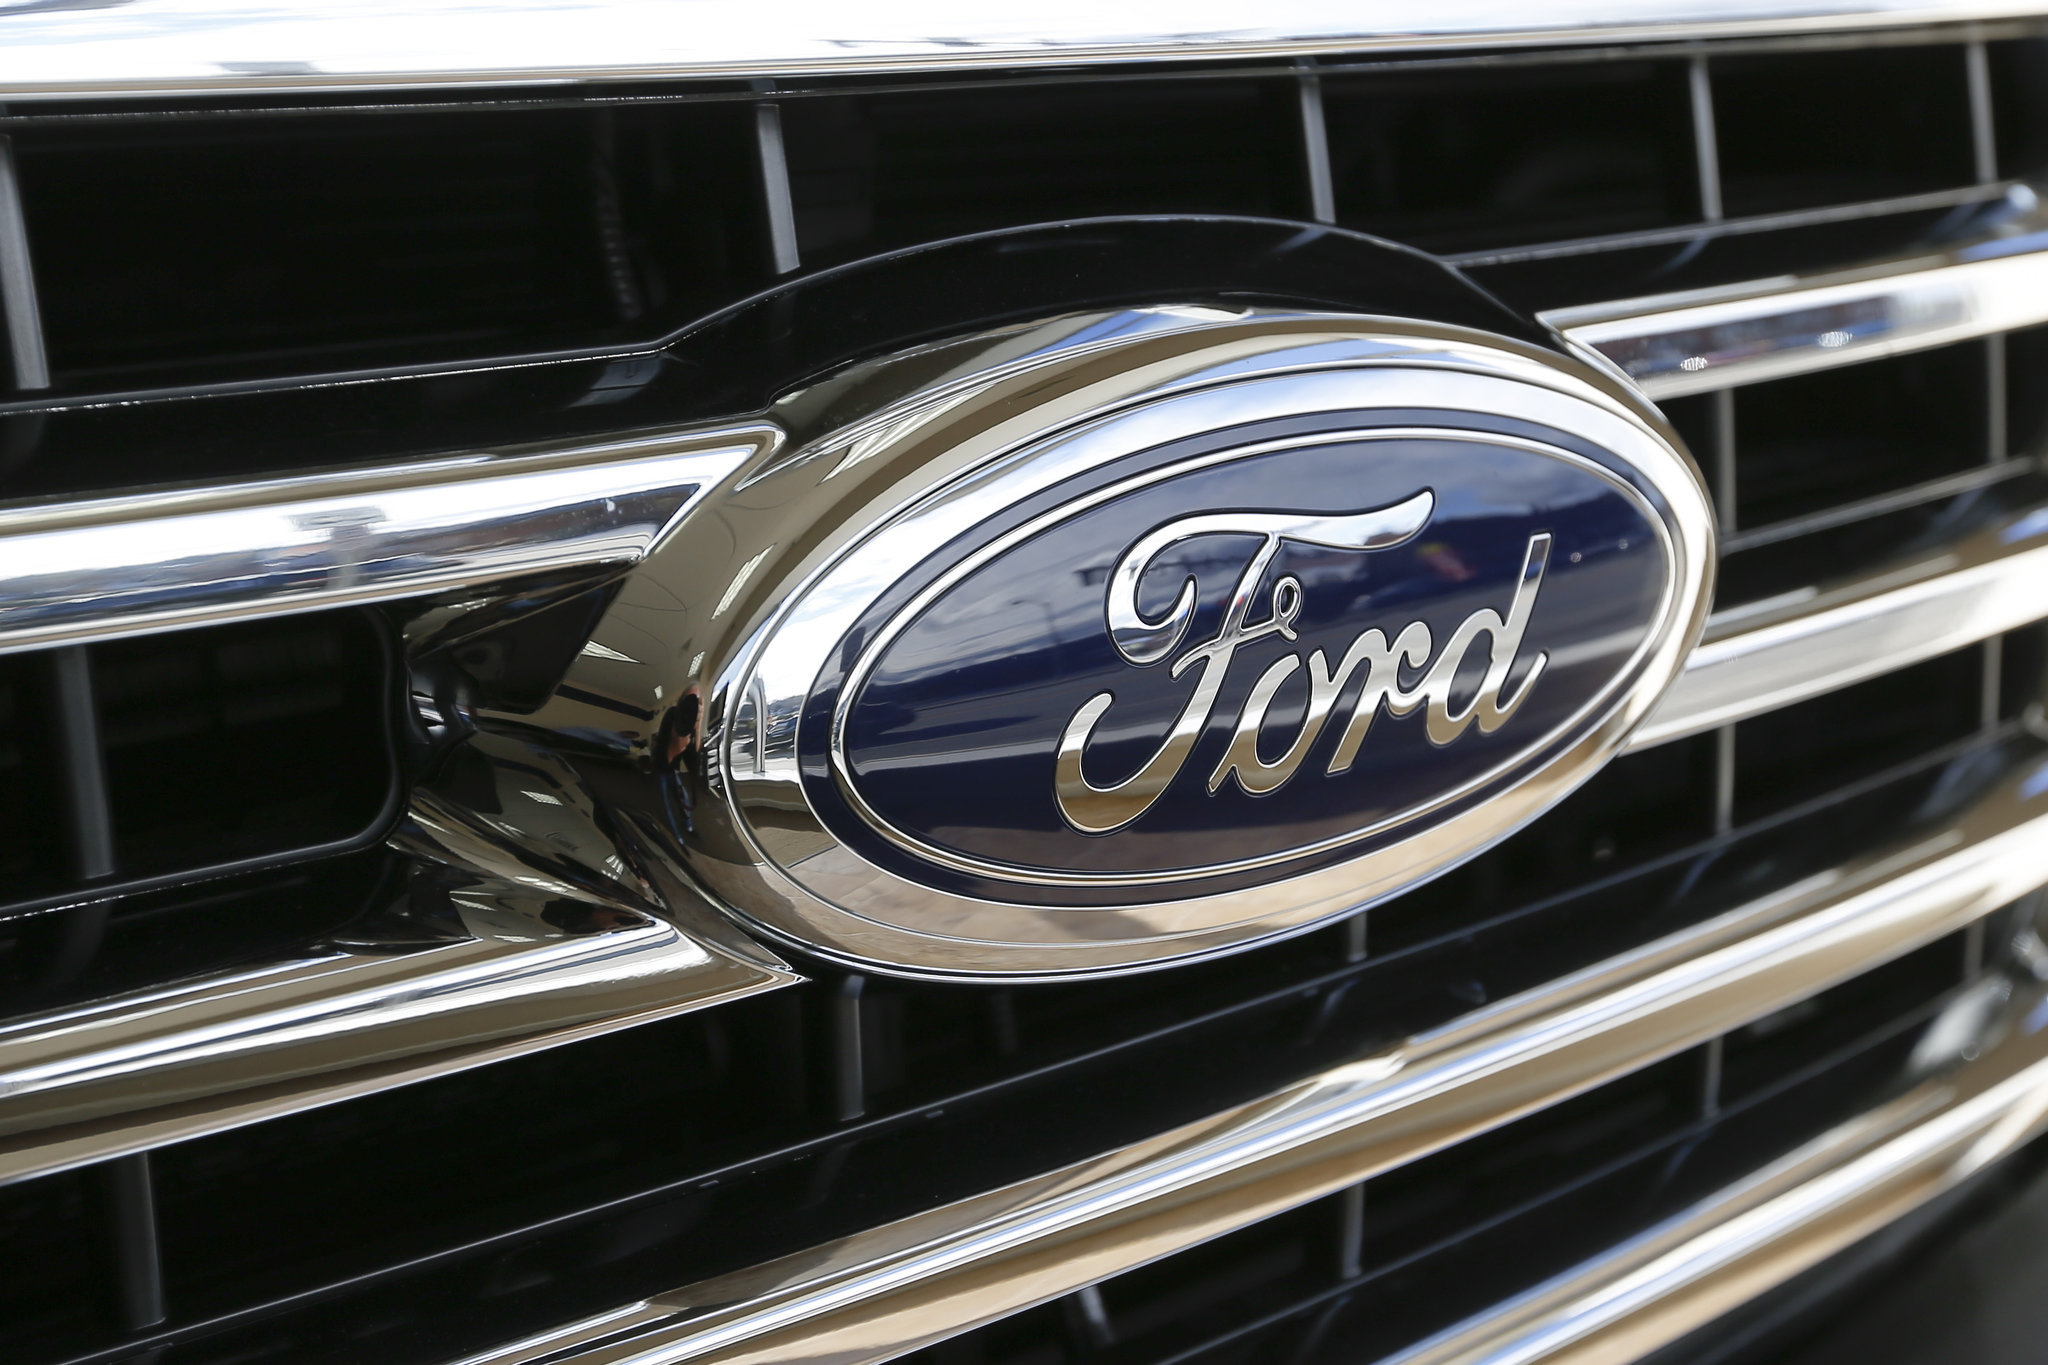 Ford recalls 1.3 million trucks to correct issue with door latch